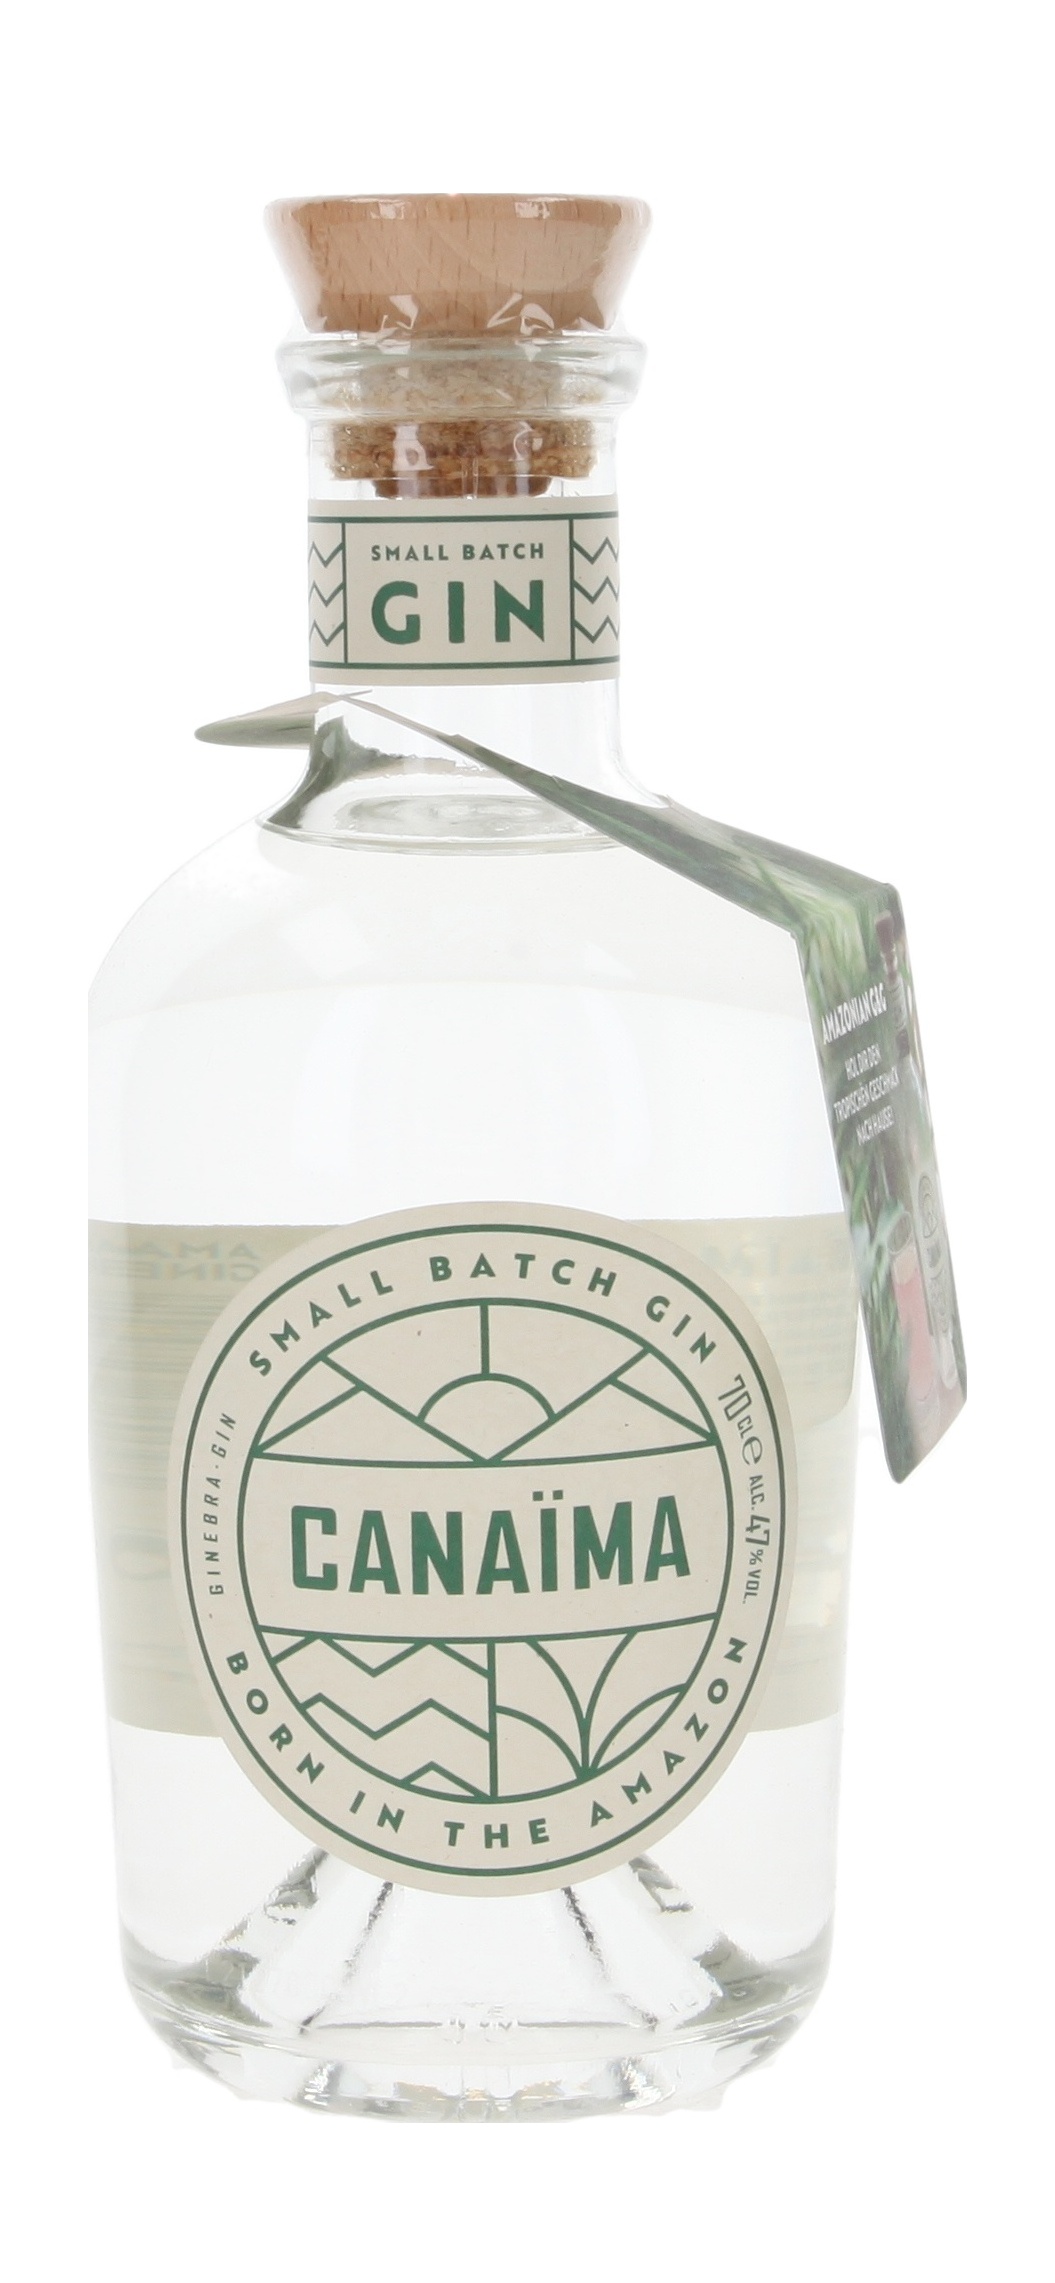 the | » Batch Whisky.de online Small Canaima Gin store To